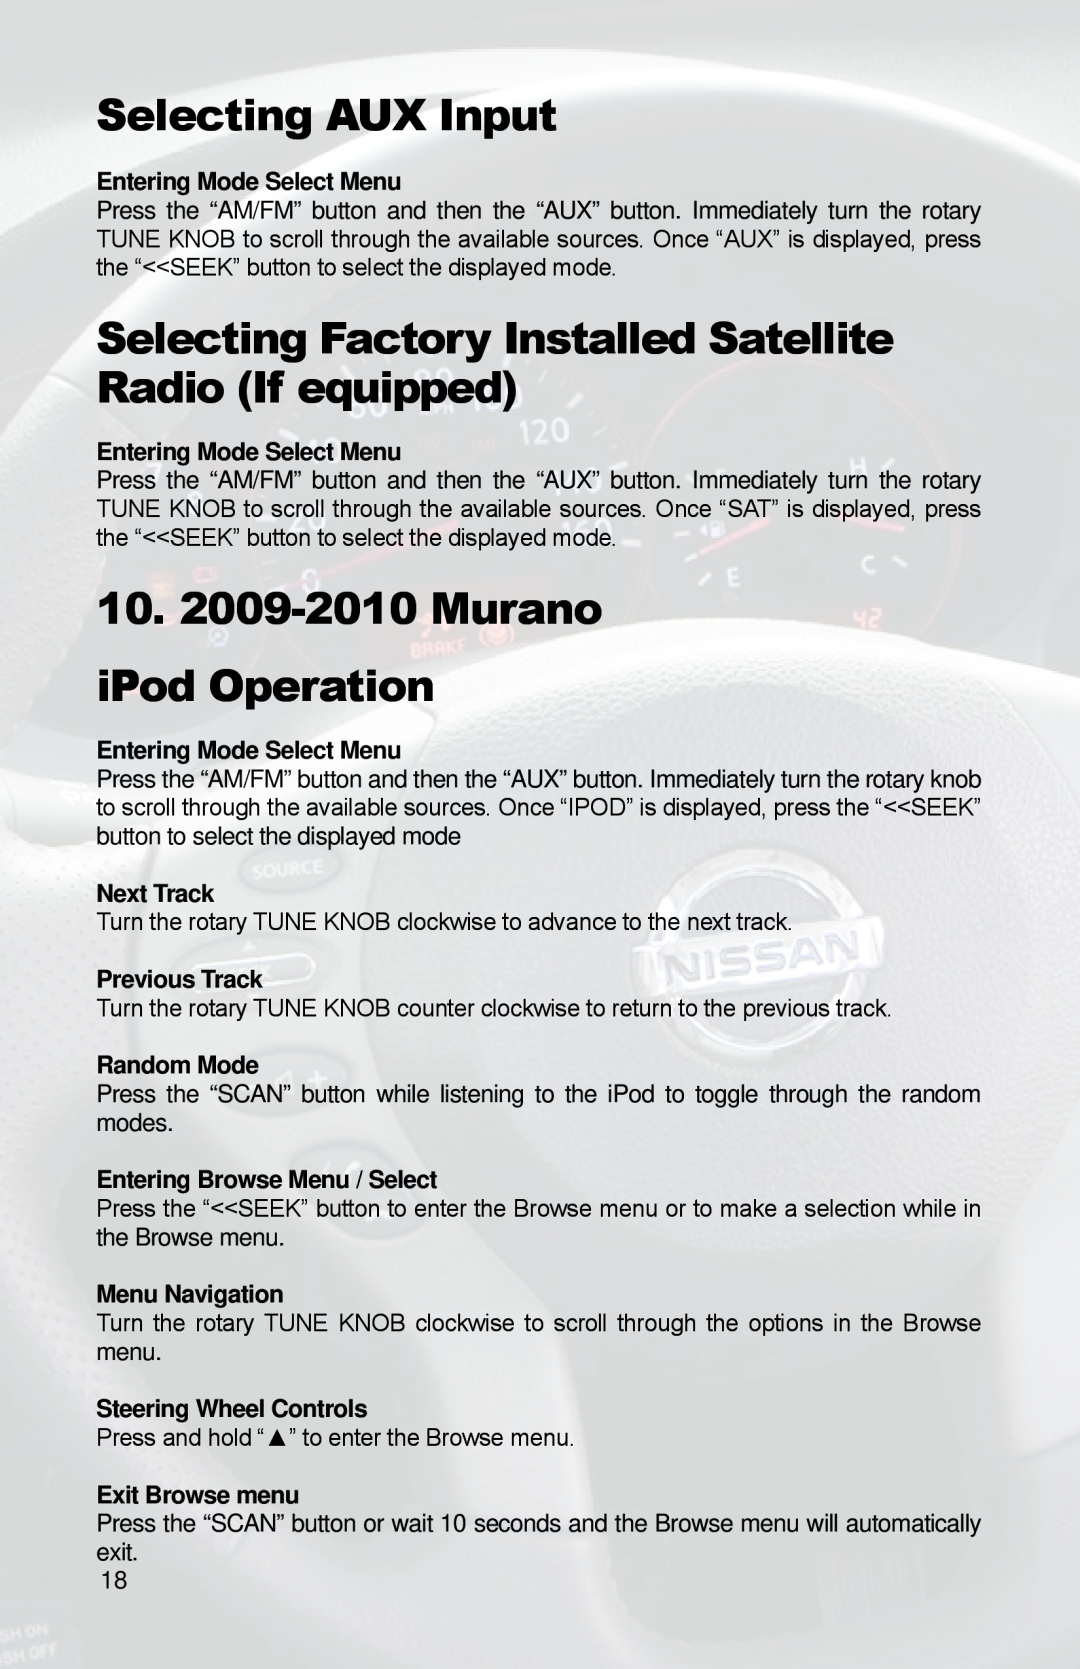 iSimple PGHNI2 owner manual 10.2009-2010Murano iPod Operation, Selecting AUX Input 